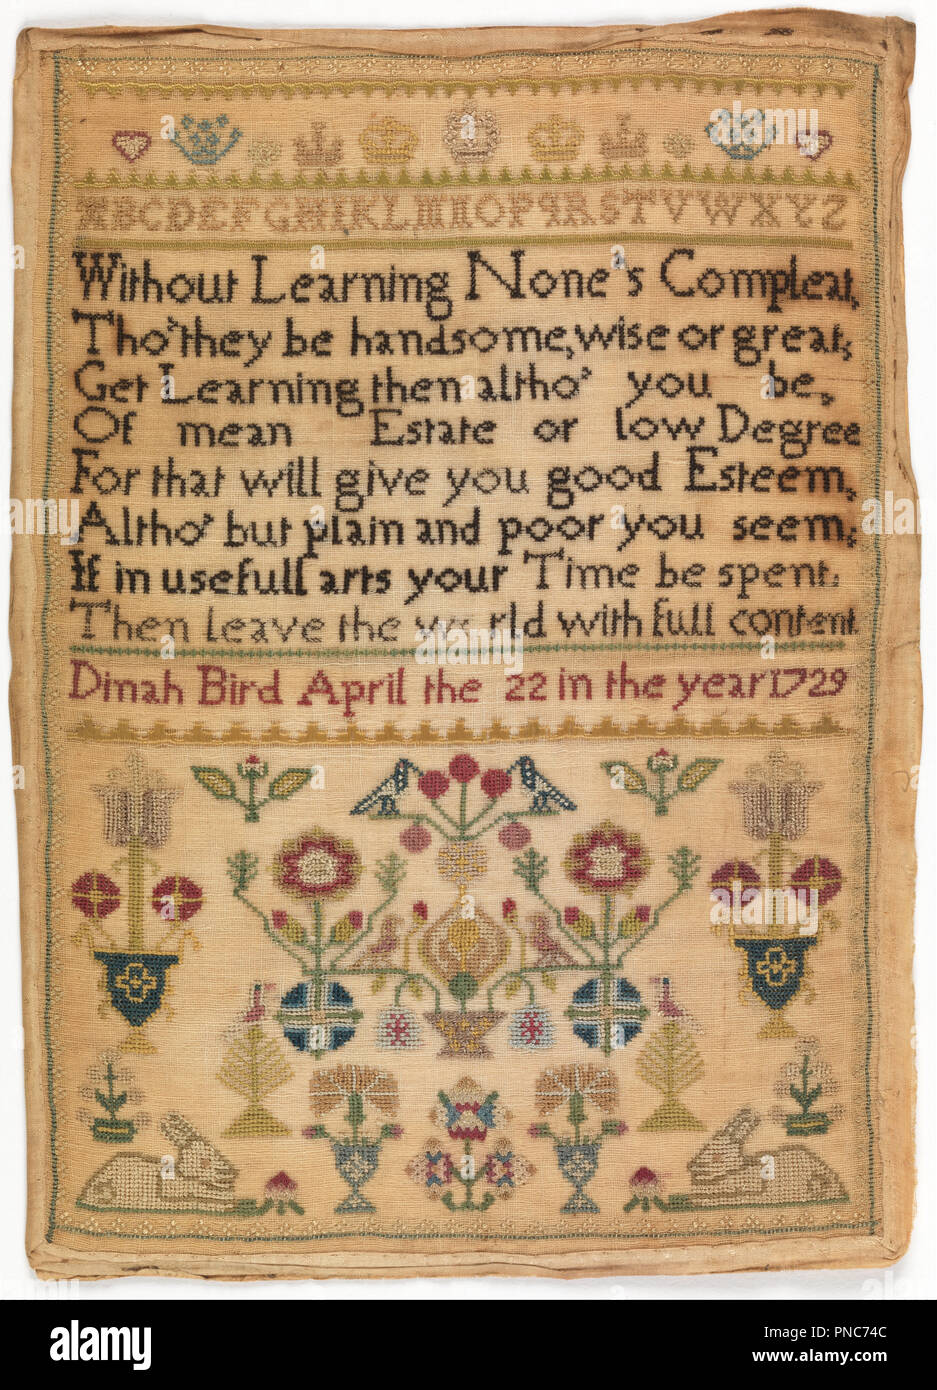 Sampler. Date/Period: 1729. Sampler. Medium: silk embroidery on cotton foundation. Technique: embroidered in cross, satin, rococo, running and double running stitches on plain weave foundation; sewn to linen tape and mounted on paper. Height: 225 mm (8.85 in); Width: 160 mm (6.29 in). Author: Dinah Bird. Stock Photo